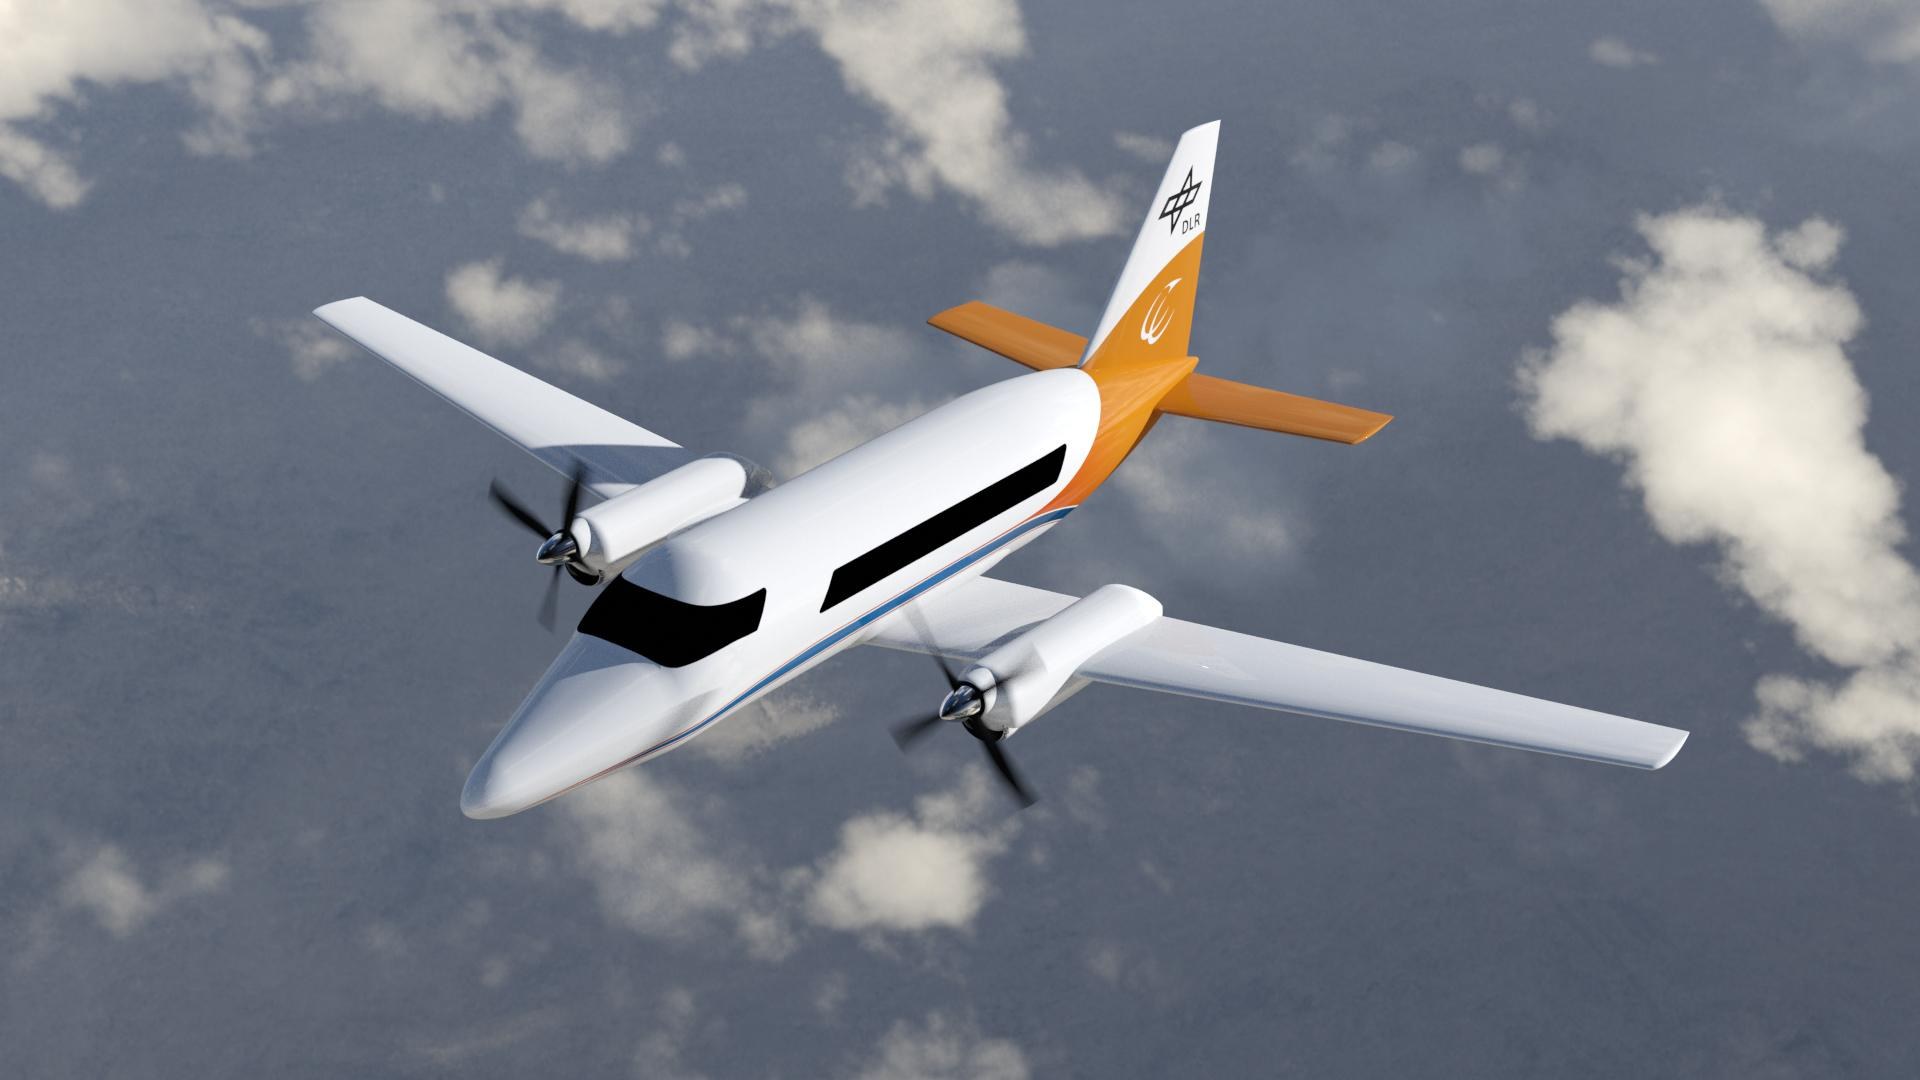 Conceptual study of a hybrid-electric 19-seater aircraft as part of the CoCoRe research project